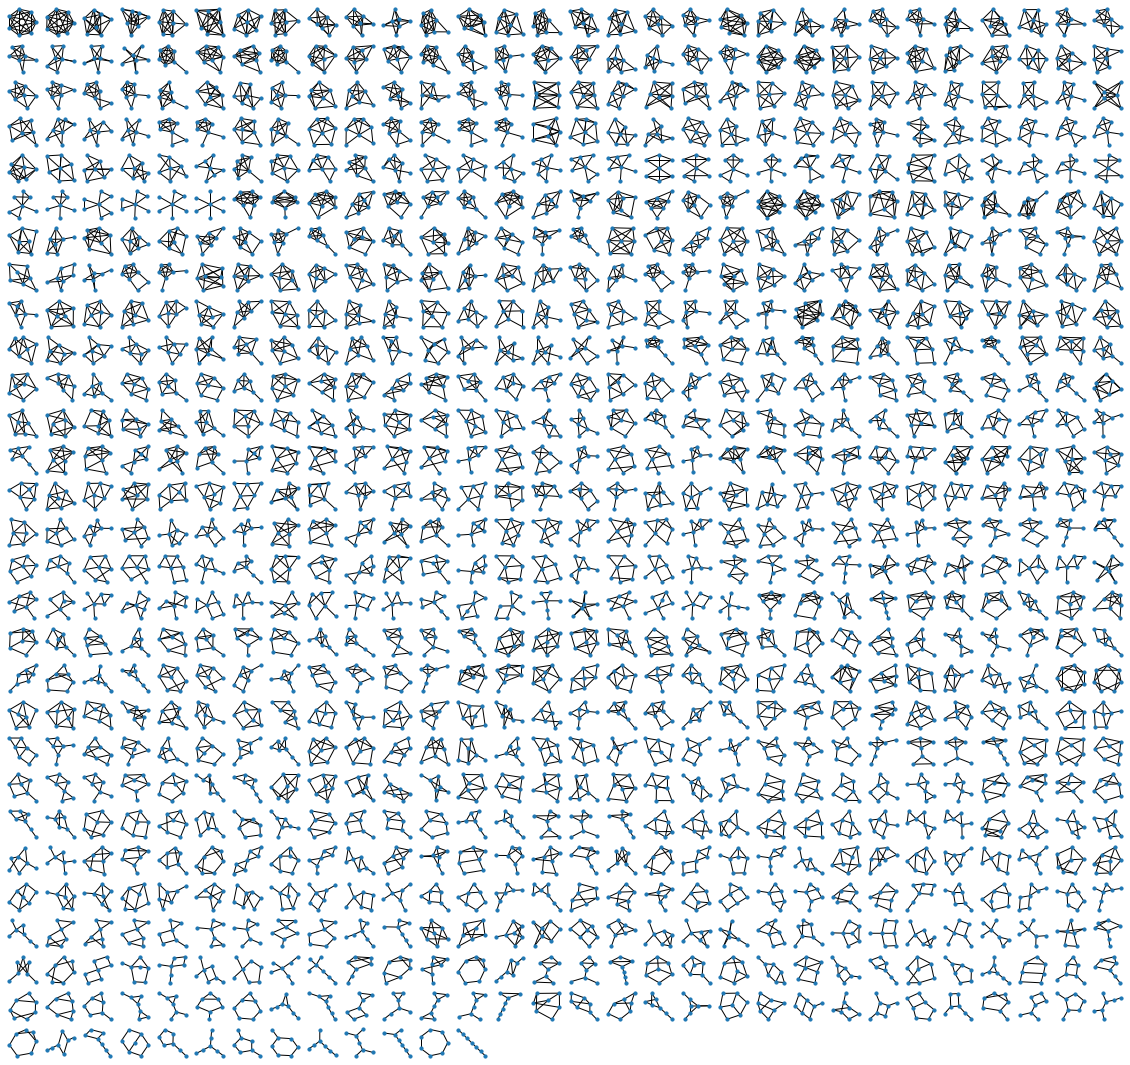 ALL 853 possibilities of non isomorphic graphs with 7 nodes. The different graphs show multiple possible structures from a complete graph of 7 nodes to a path graph of 7 nodes. Other structures present in this collection show many star and kite-shaped graphs.